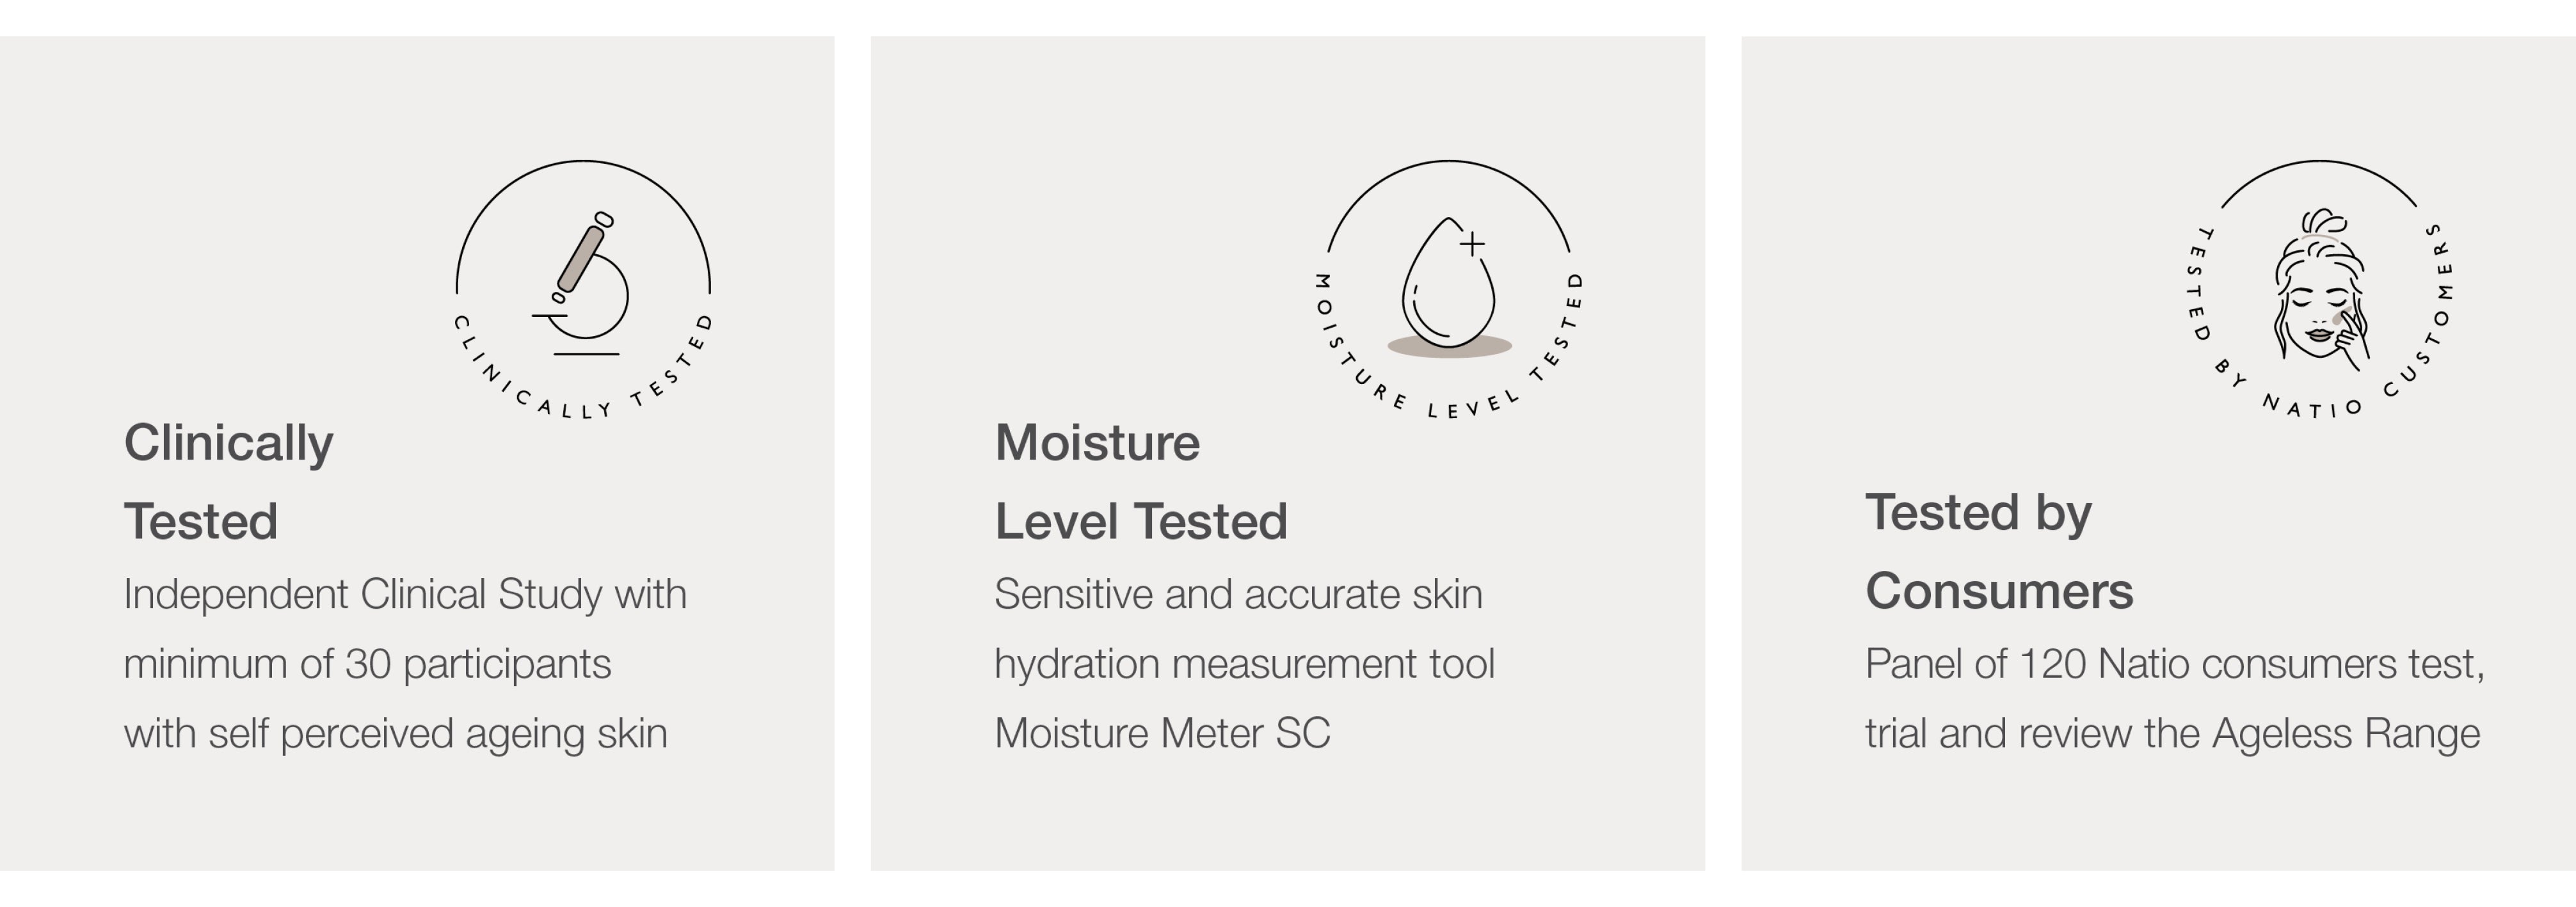 clinically tested, moisture level tested, tested by consumers